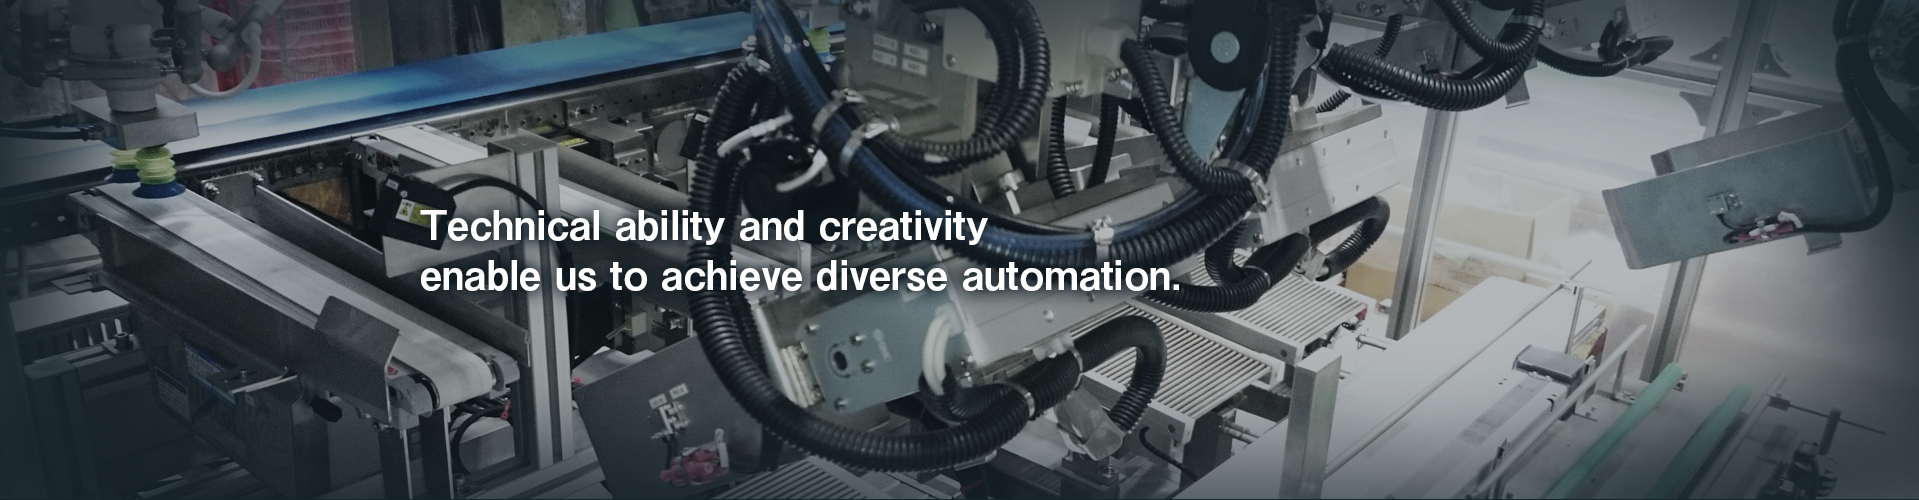 Technical ability and creativity enable us to achieve diverse automation.